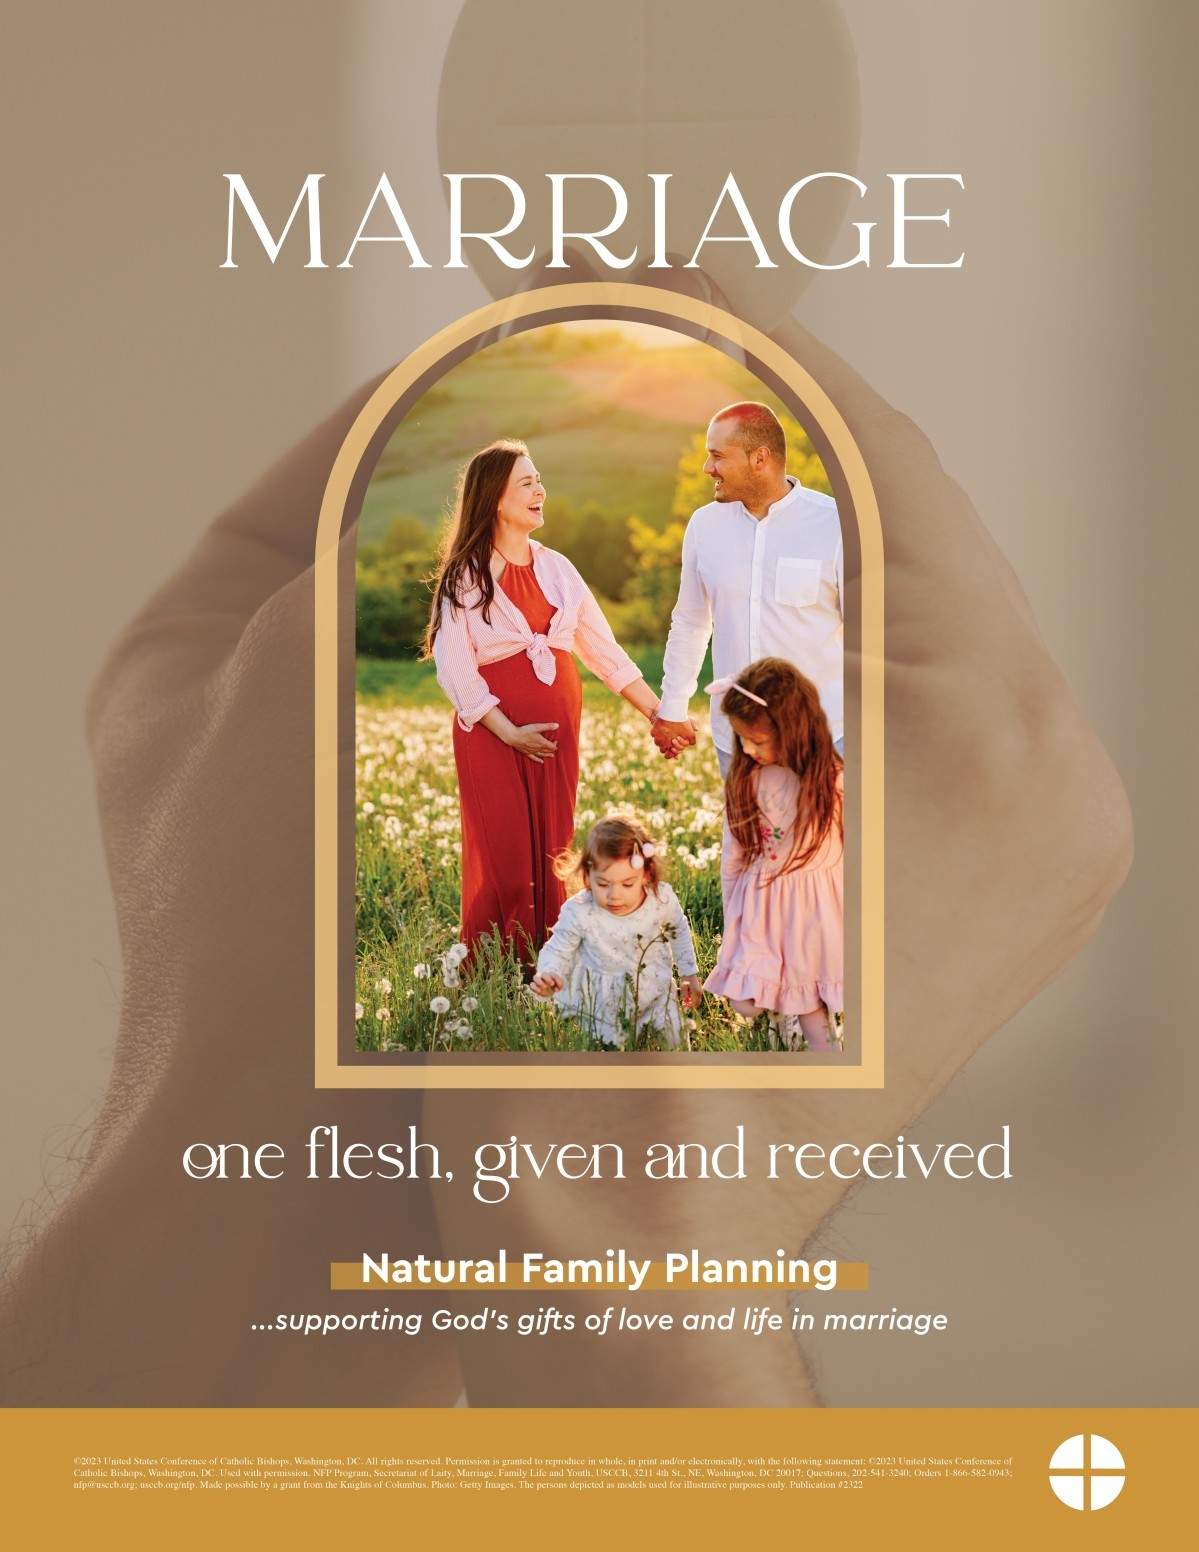 MARRIAGEL one flesh, given and received. Natural Family Planning ...supporting God's gifts of love and life in marriage.